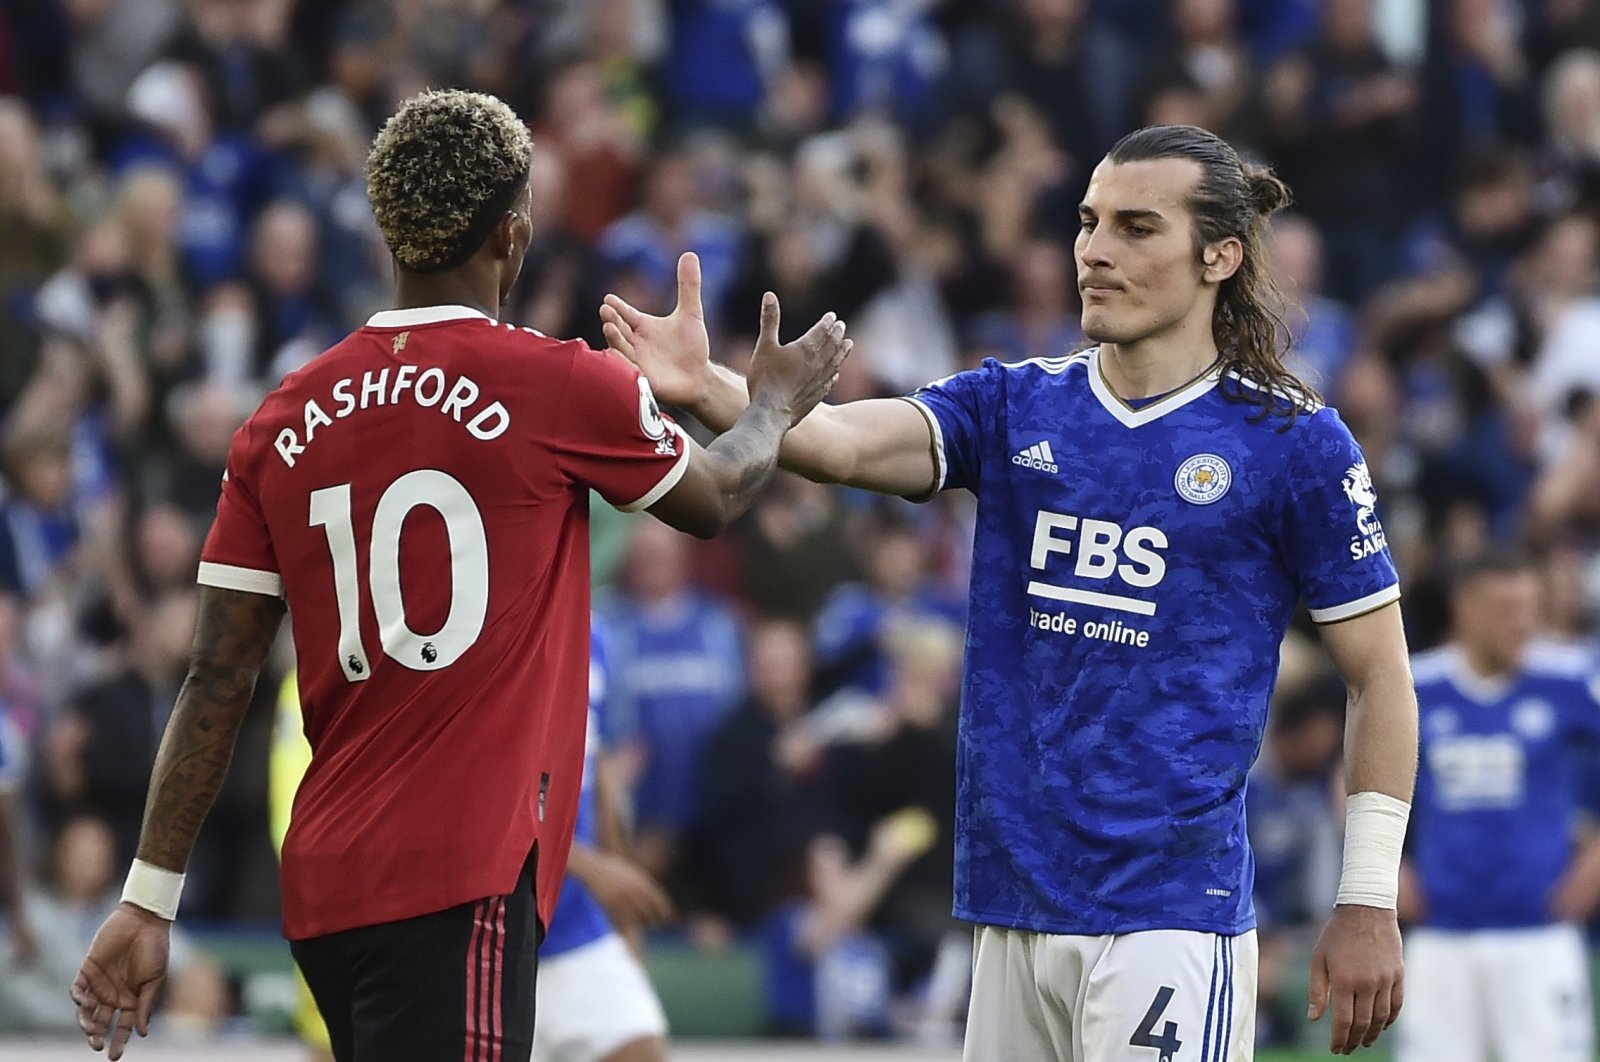 Leicester's Cağlar Söyüncü (R) greets Manchester United's Marcus Rashford after the English Premier League football match between Leicester City and Manchester United at King Power stadium in Leicester, England, Oct. 16, 2021. (AP Photo)